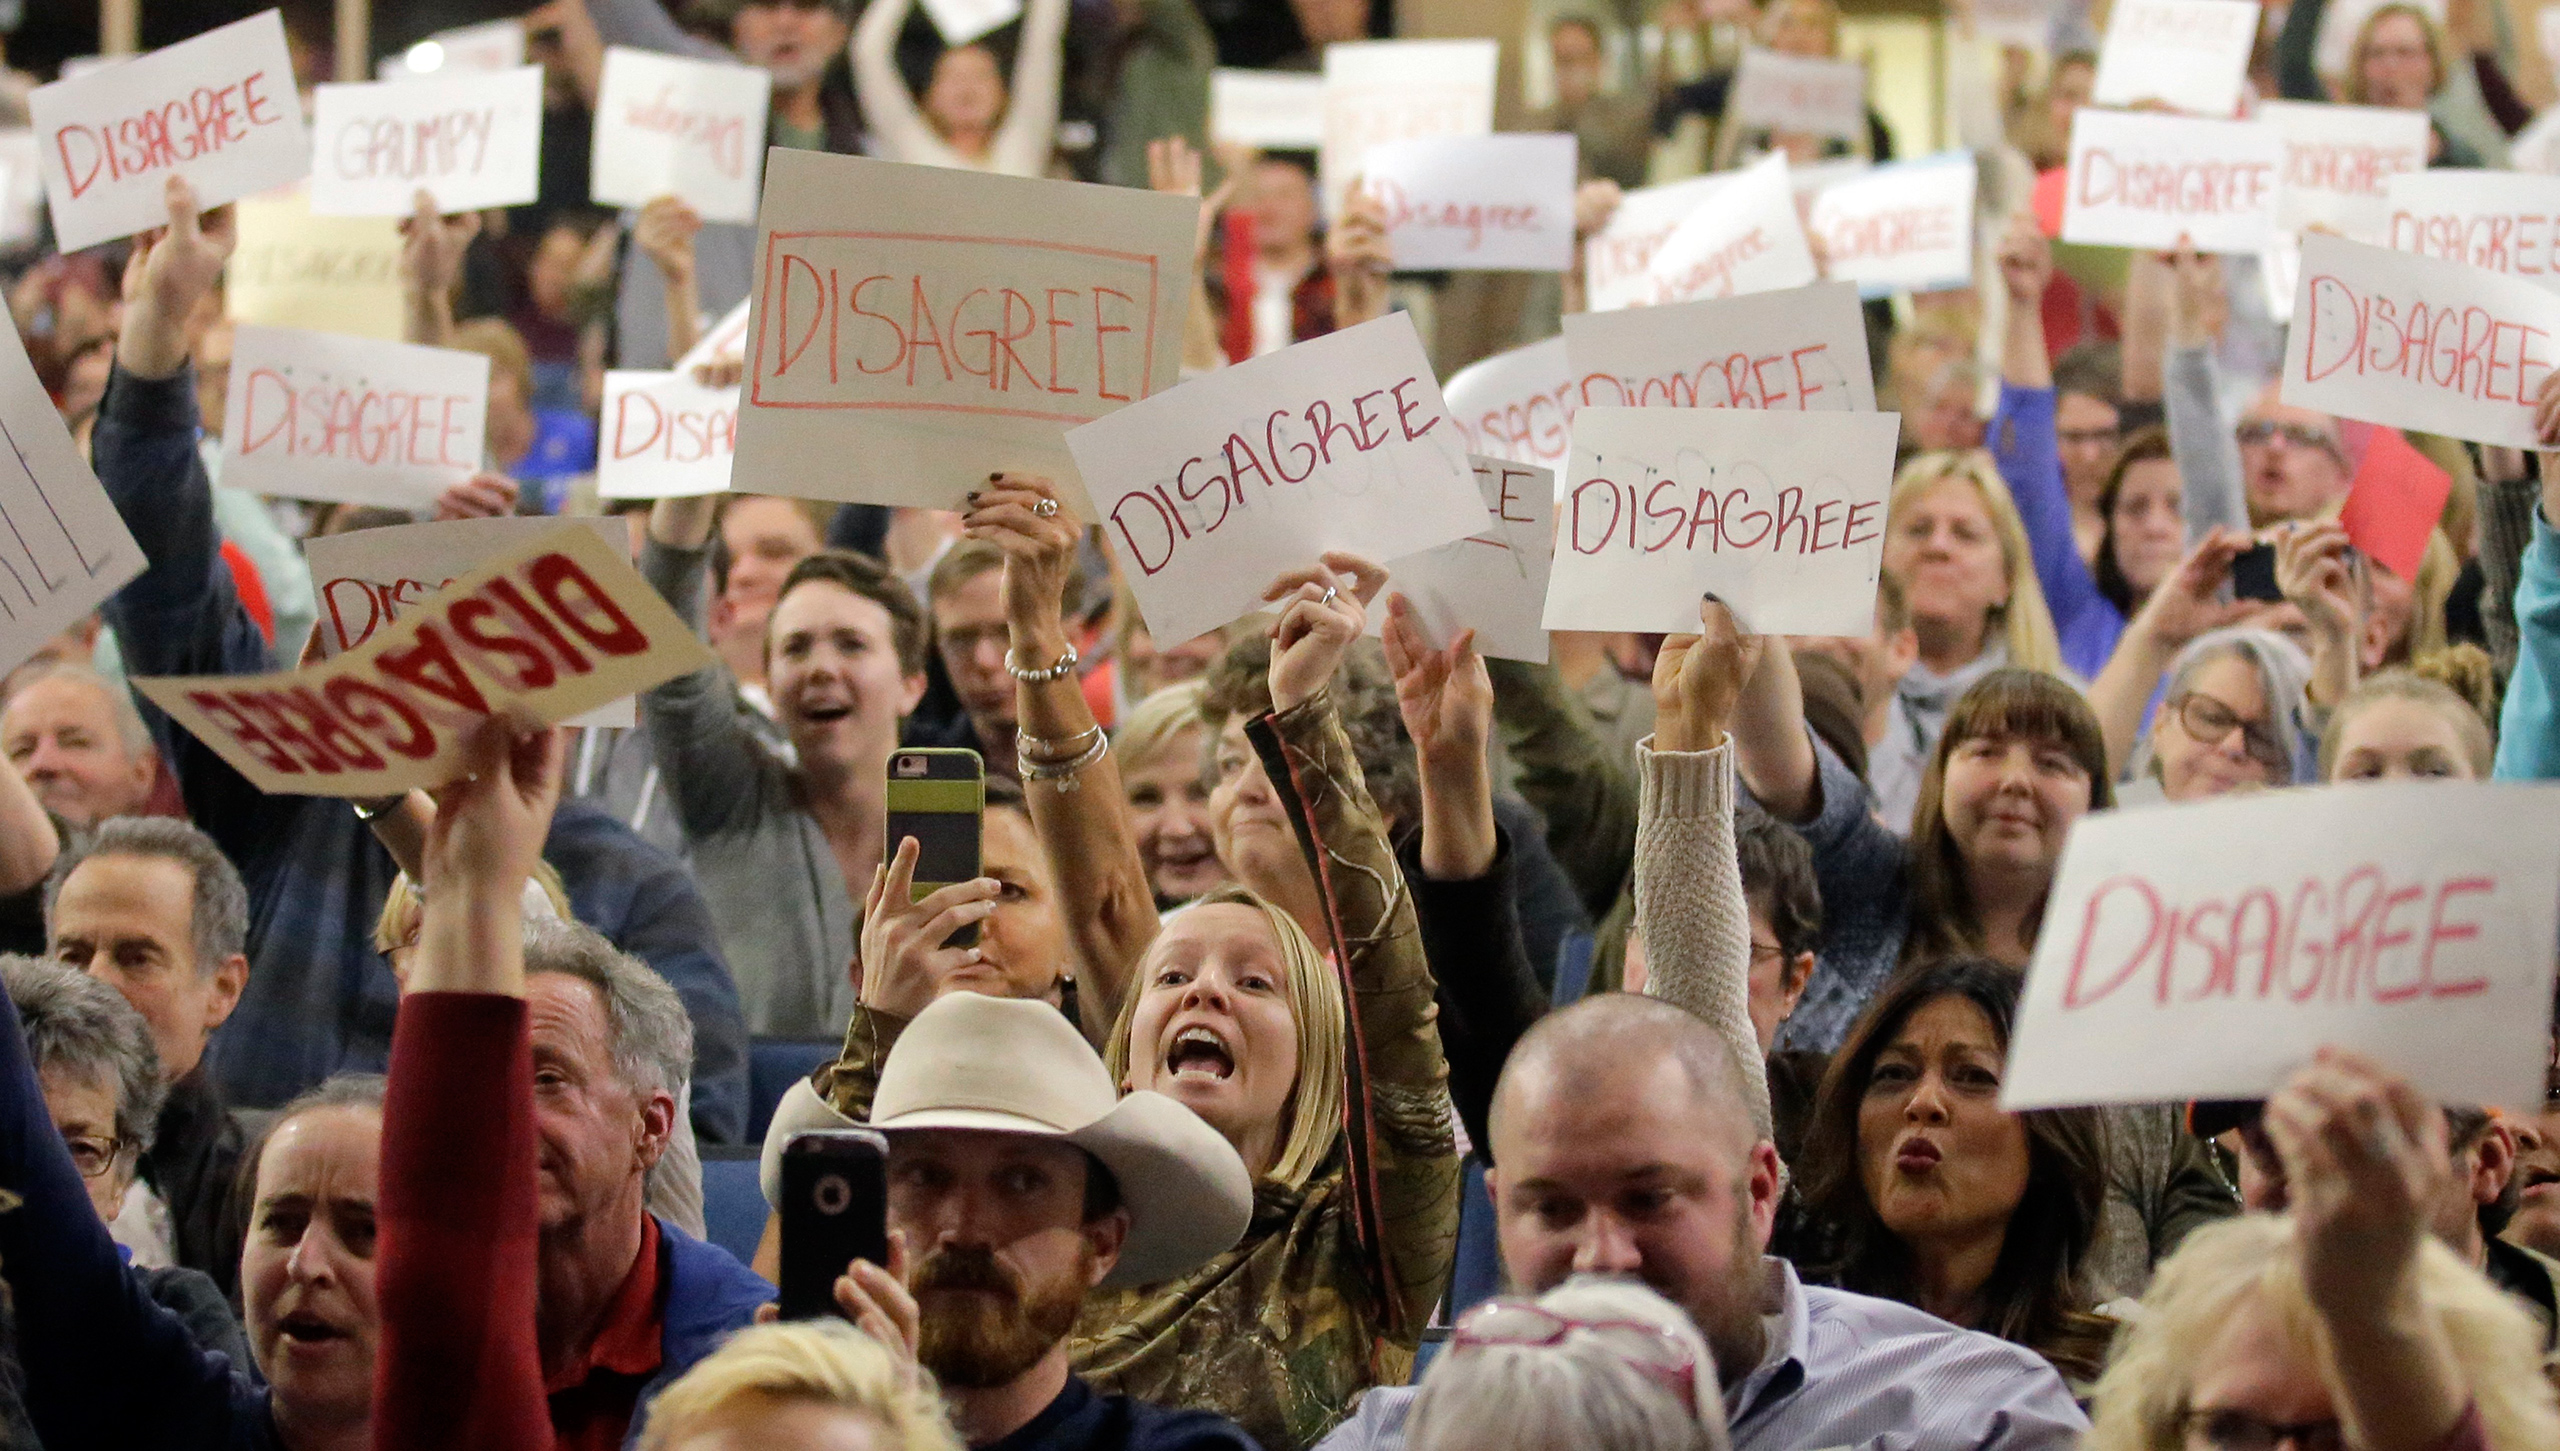 In this Thursday, Feb. 9, 2017 photo, people react as U.S. Rep. Jason Chaffetz speaks during a town hall meeting at Brighton High School in Cottonwood Heights, Utah. Some attendees of the contentious town hall hosted by Chaffetz have sent the congressman fake invoices after he claimed some people there were paid protesters. (Rick Bowmer—AP)